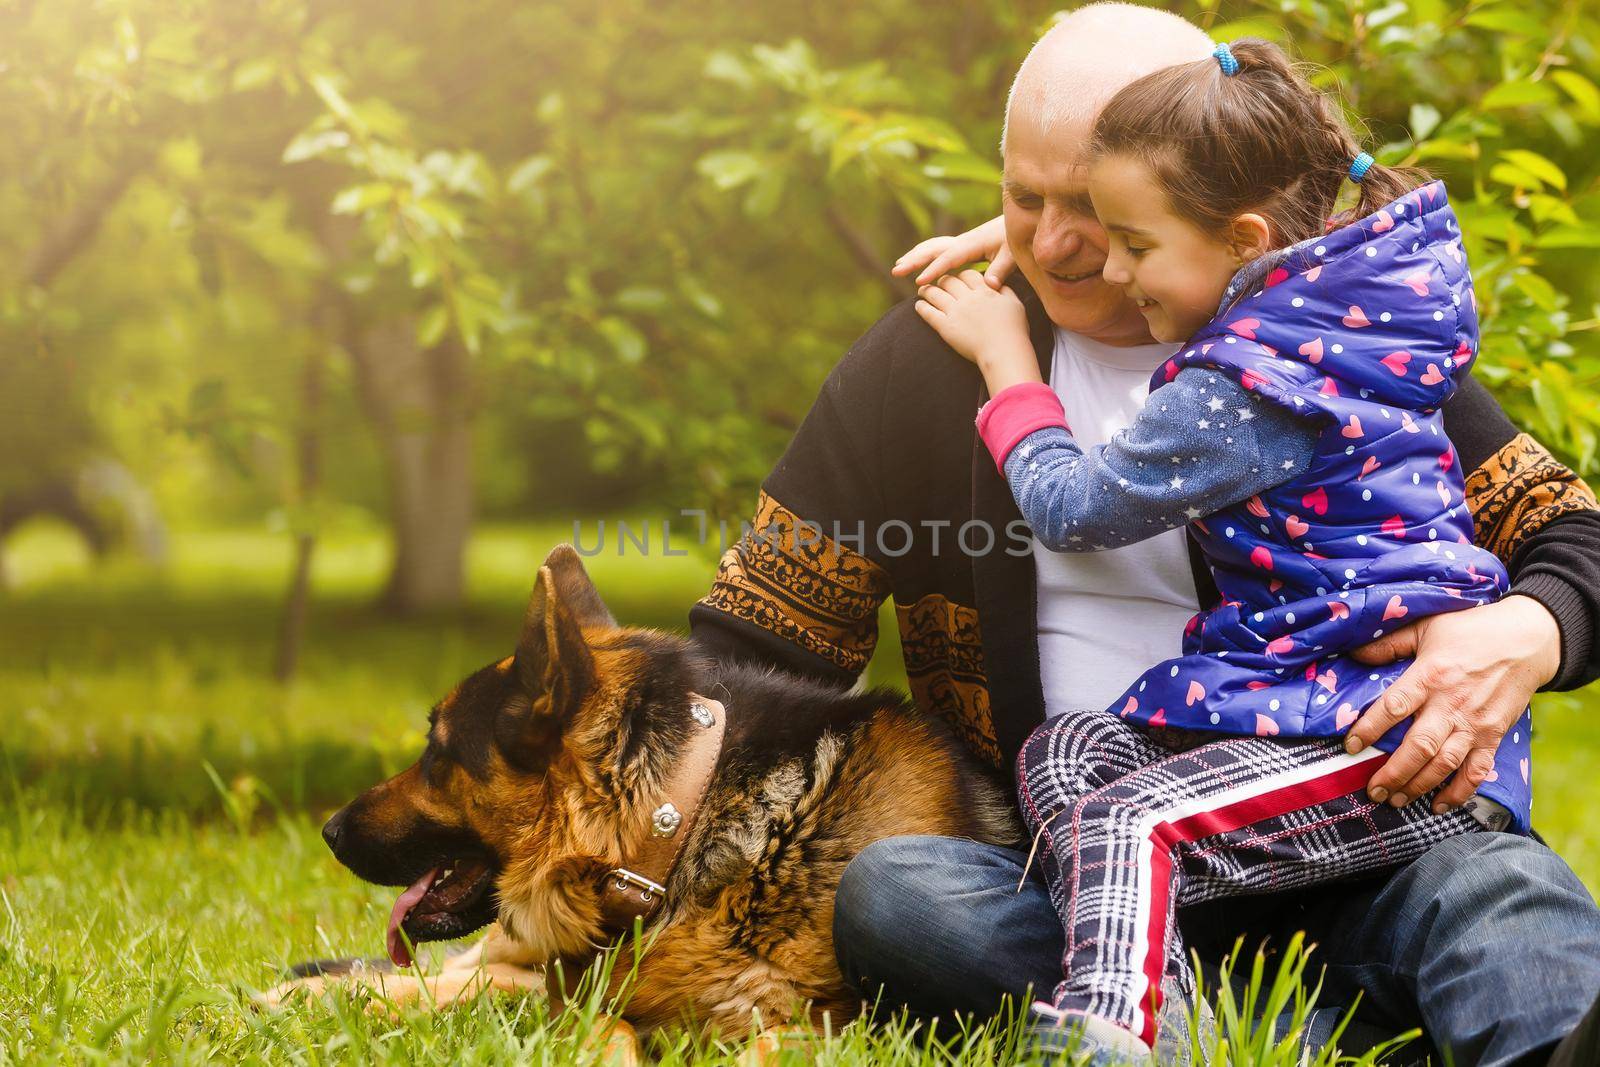 Grandfather with granddaughter and a dog in the garden by Andelov13